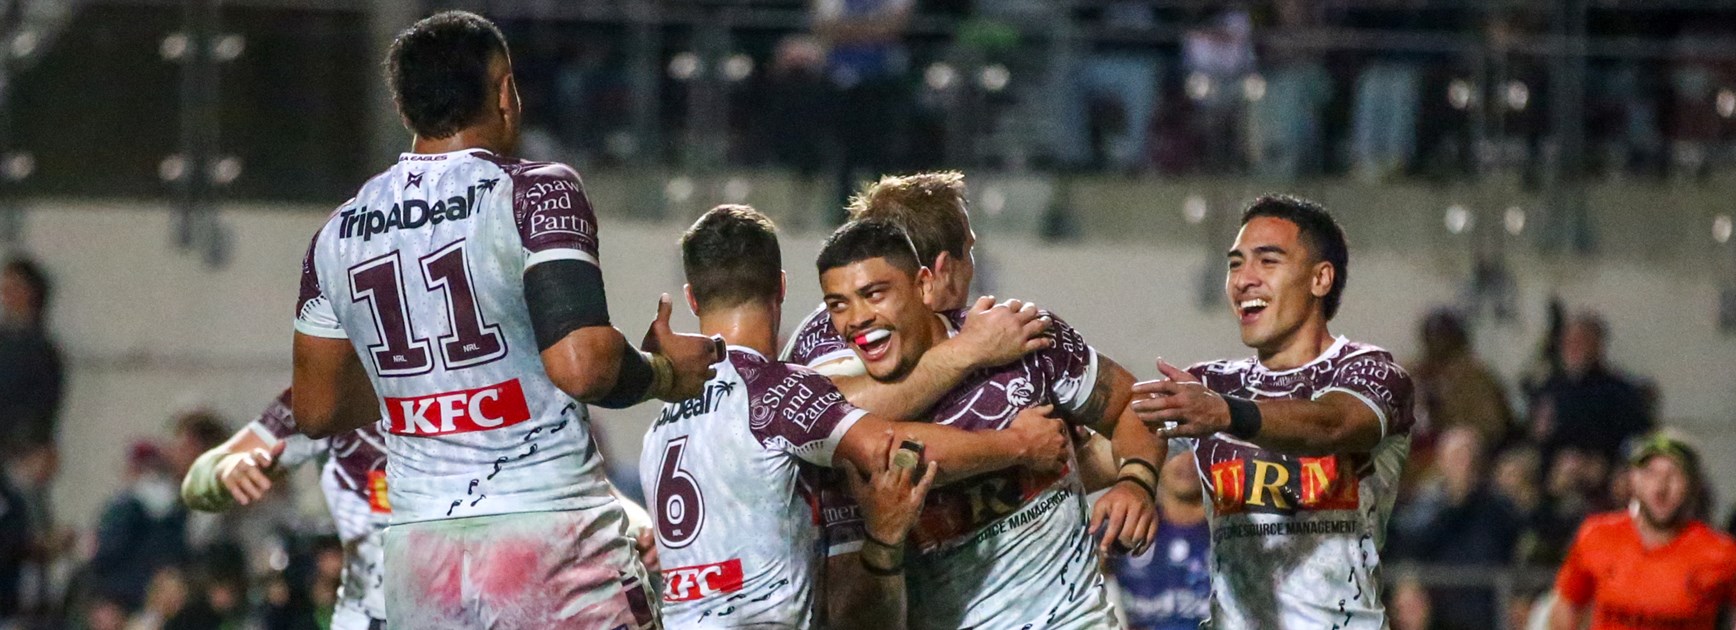 Sea Eagles lift themselves to victory over Storm